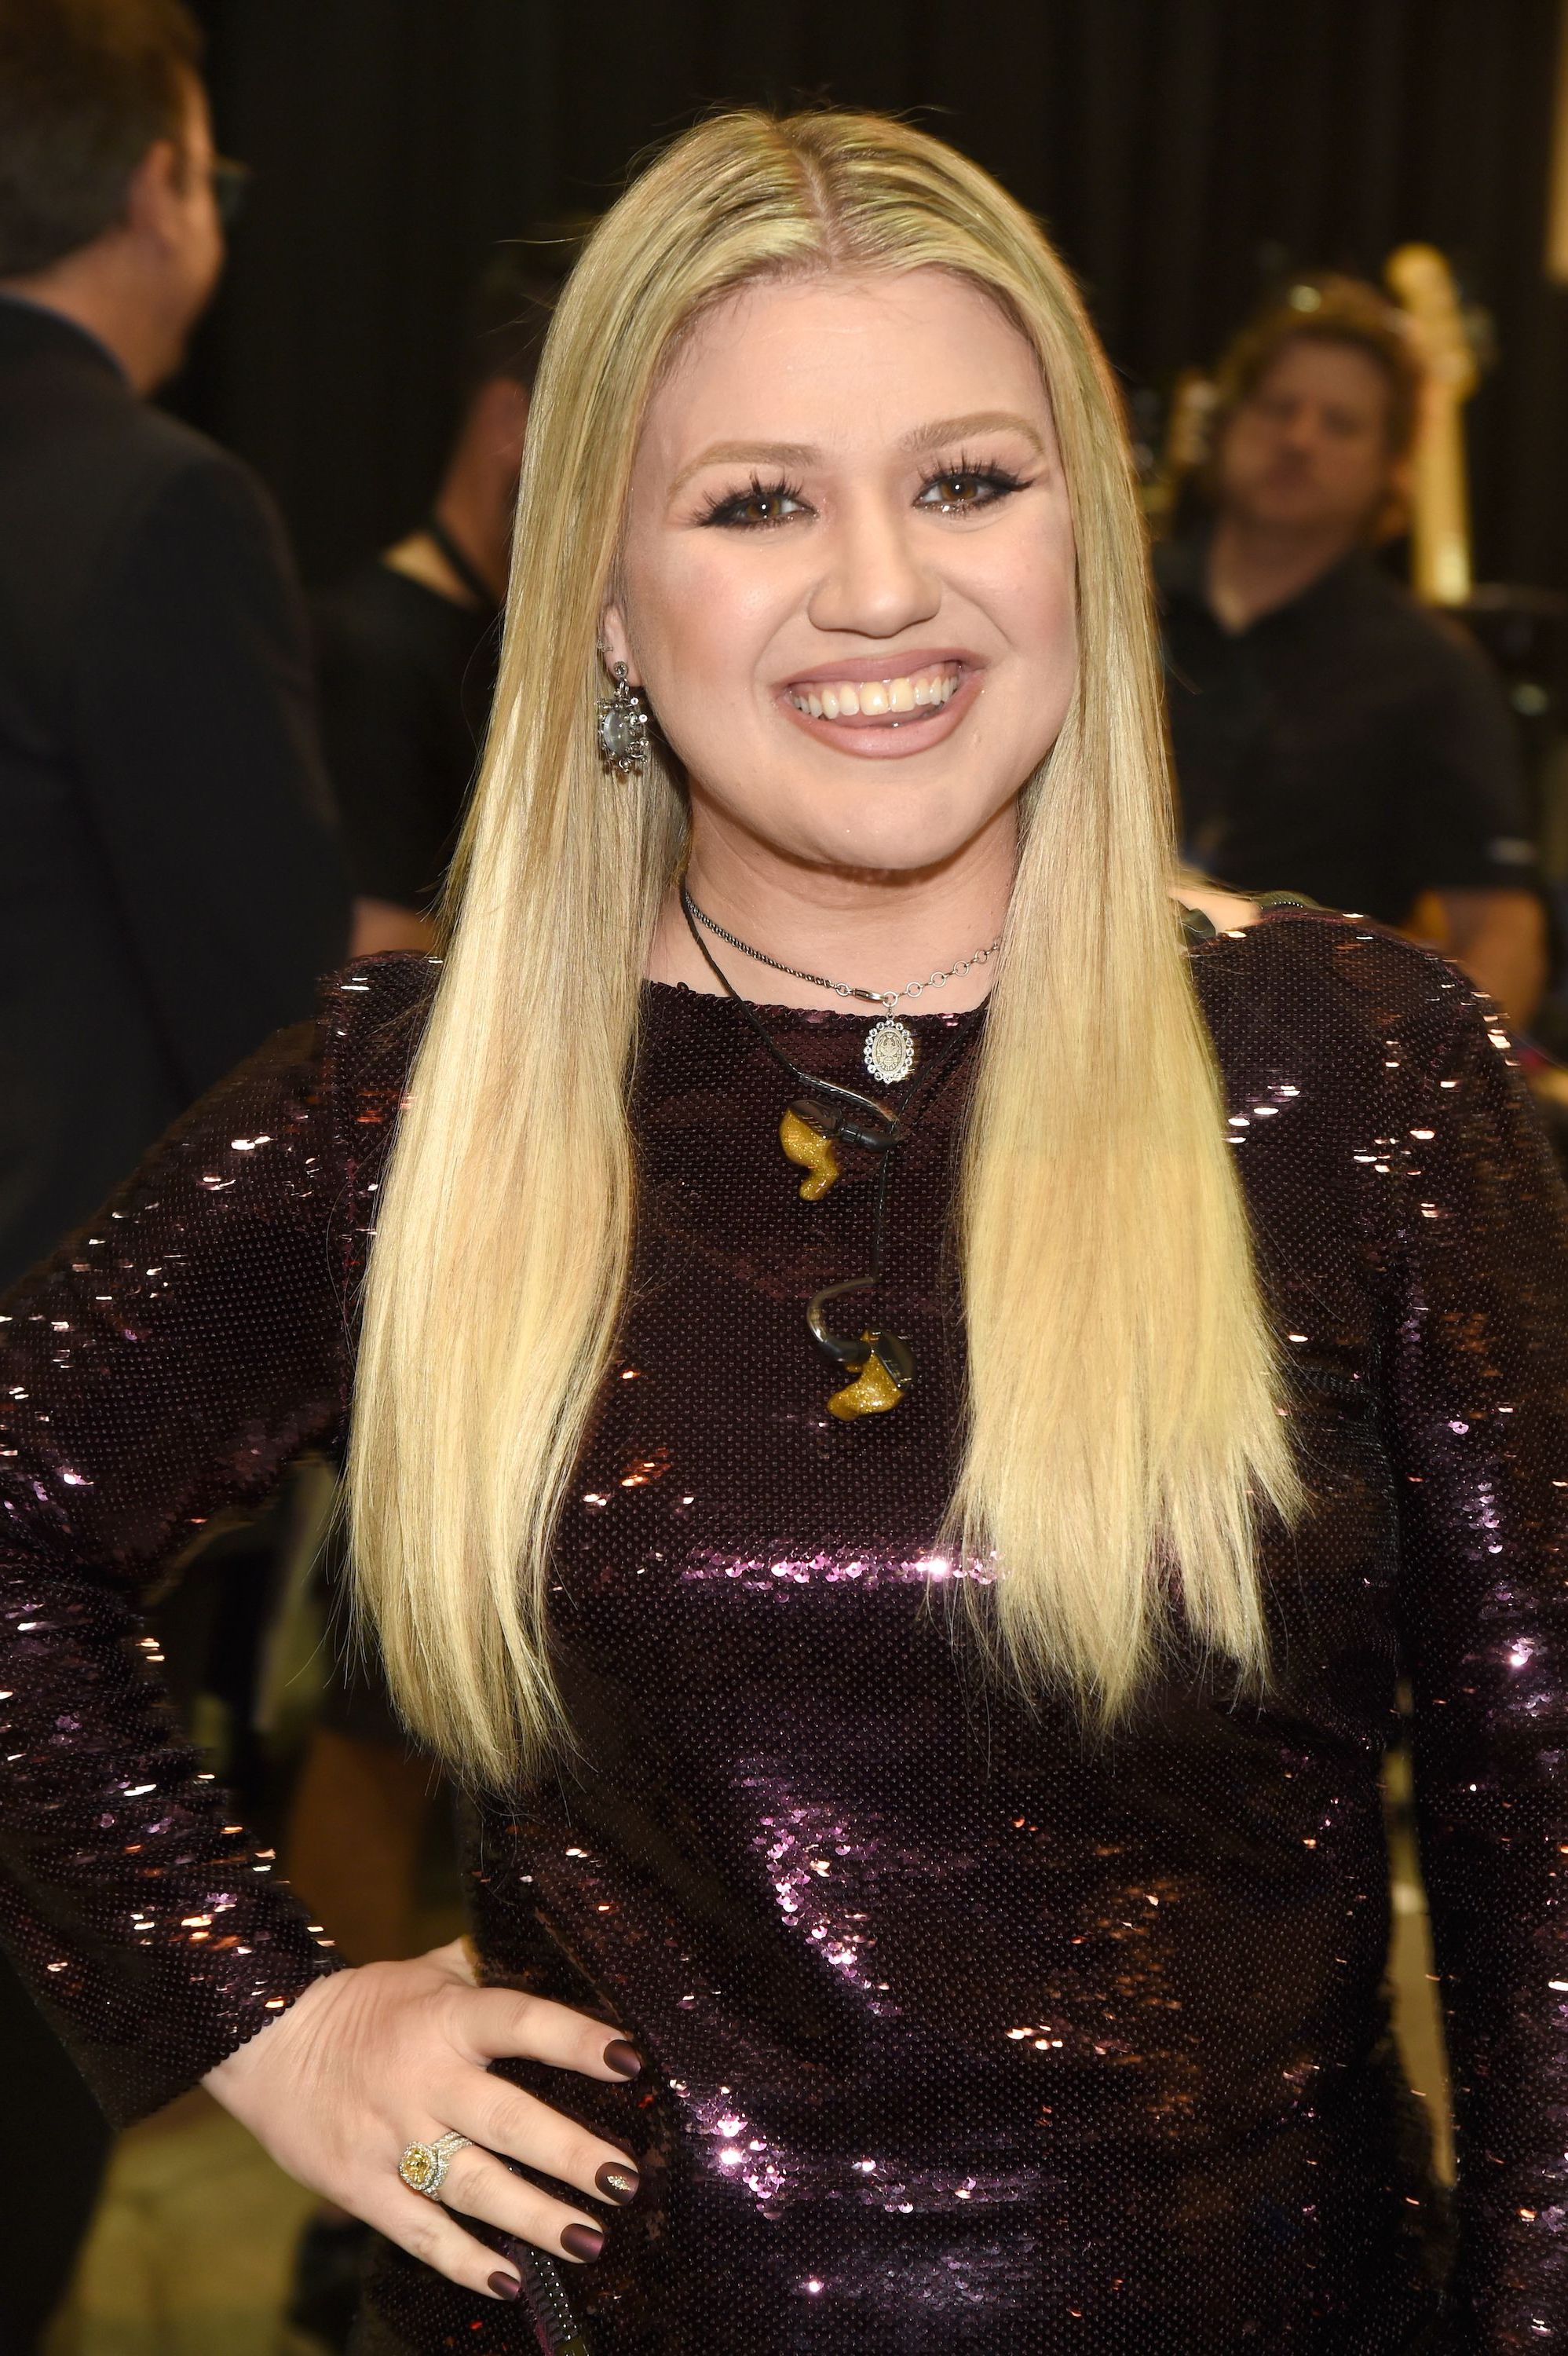 60 Layered Hairstyles & Cuts For Long Hair – Long, Layered Hair Ideas Throughout Kelly Clarkson Short Haircut (View 24 of 25)